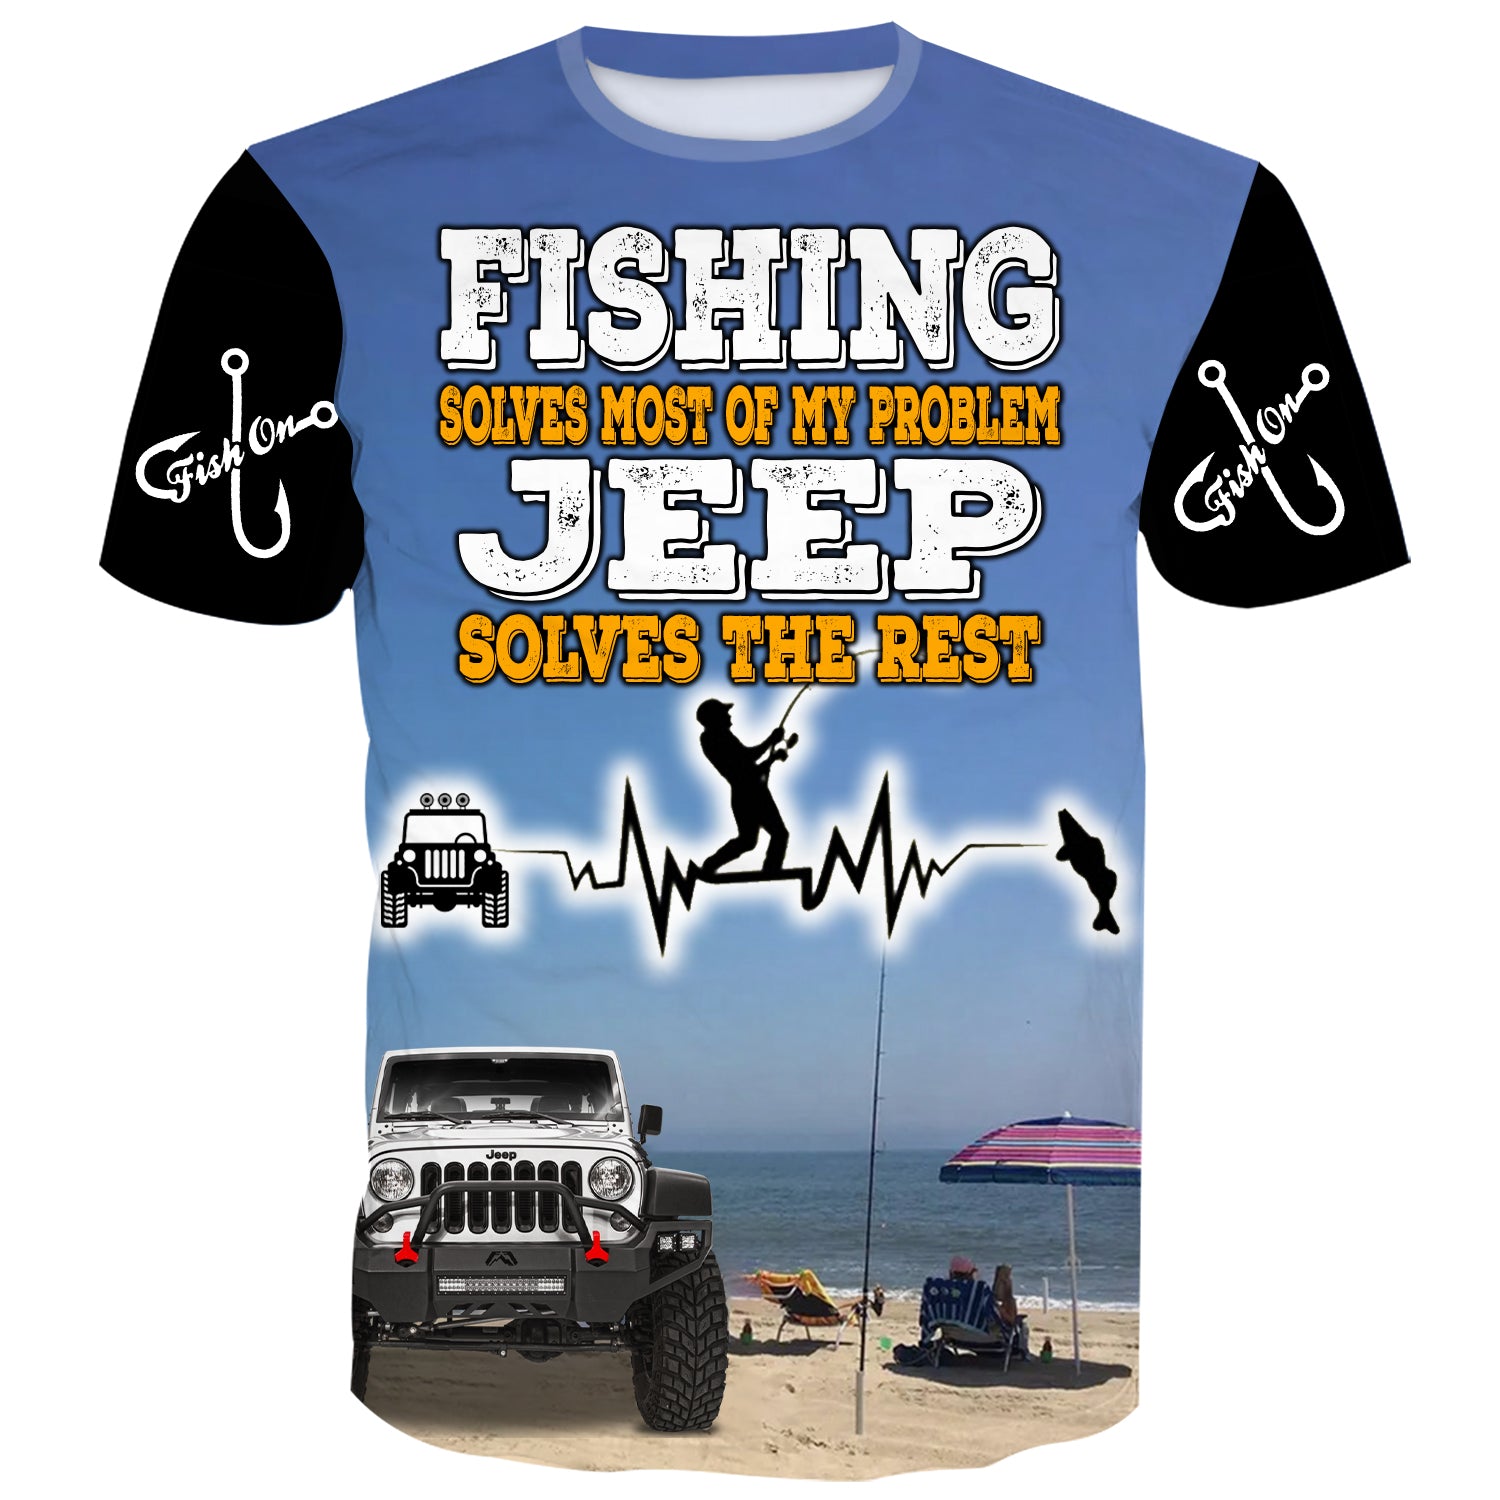 Man fishing on a beach next to a Jeep Wrangler, holding a fishing rod."